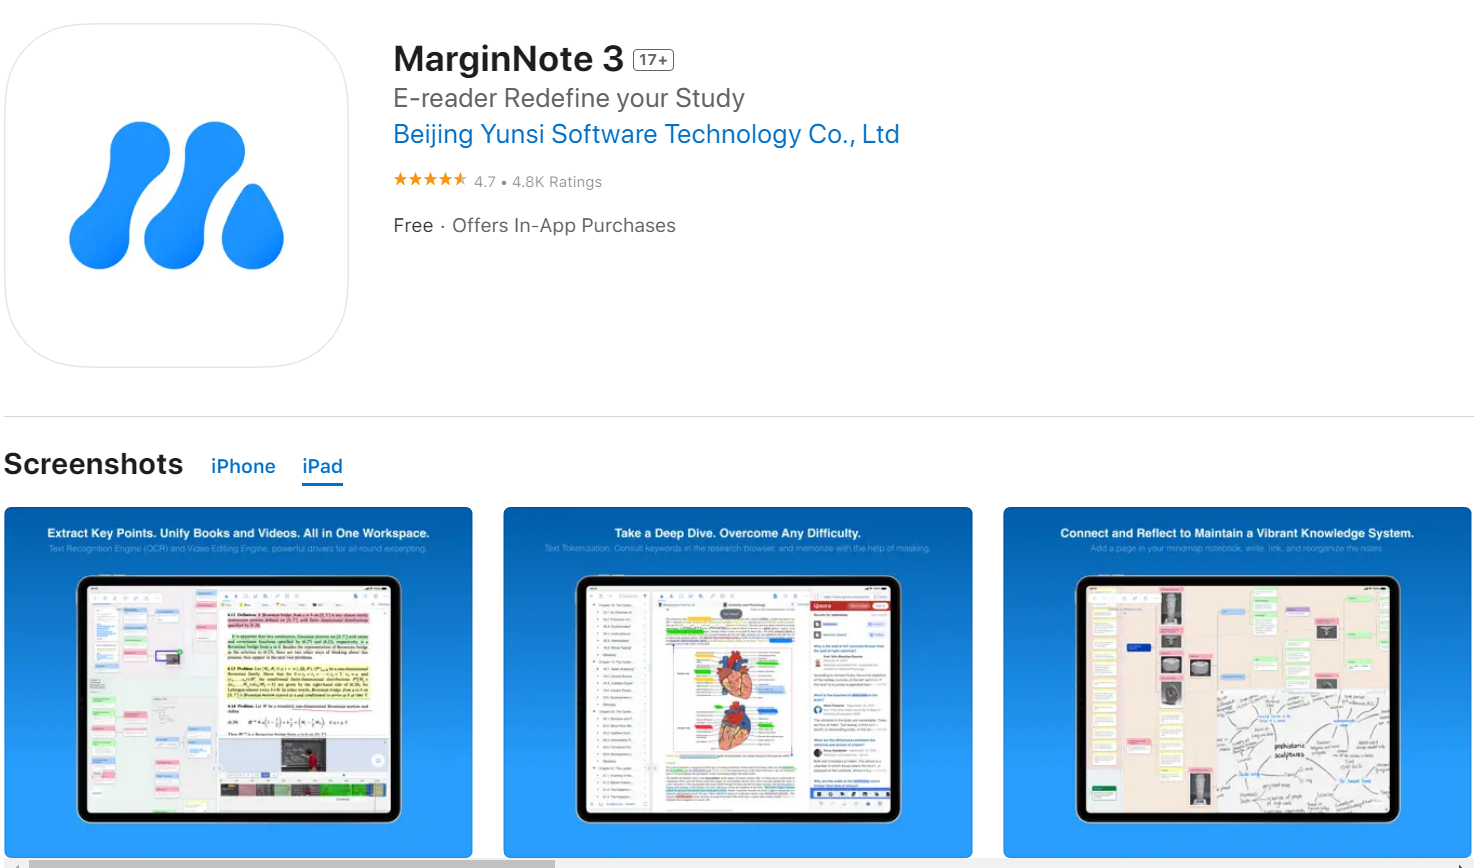 MarginNote best note-taking apps for iPad to analyze, annotate, and create notes from them